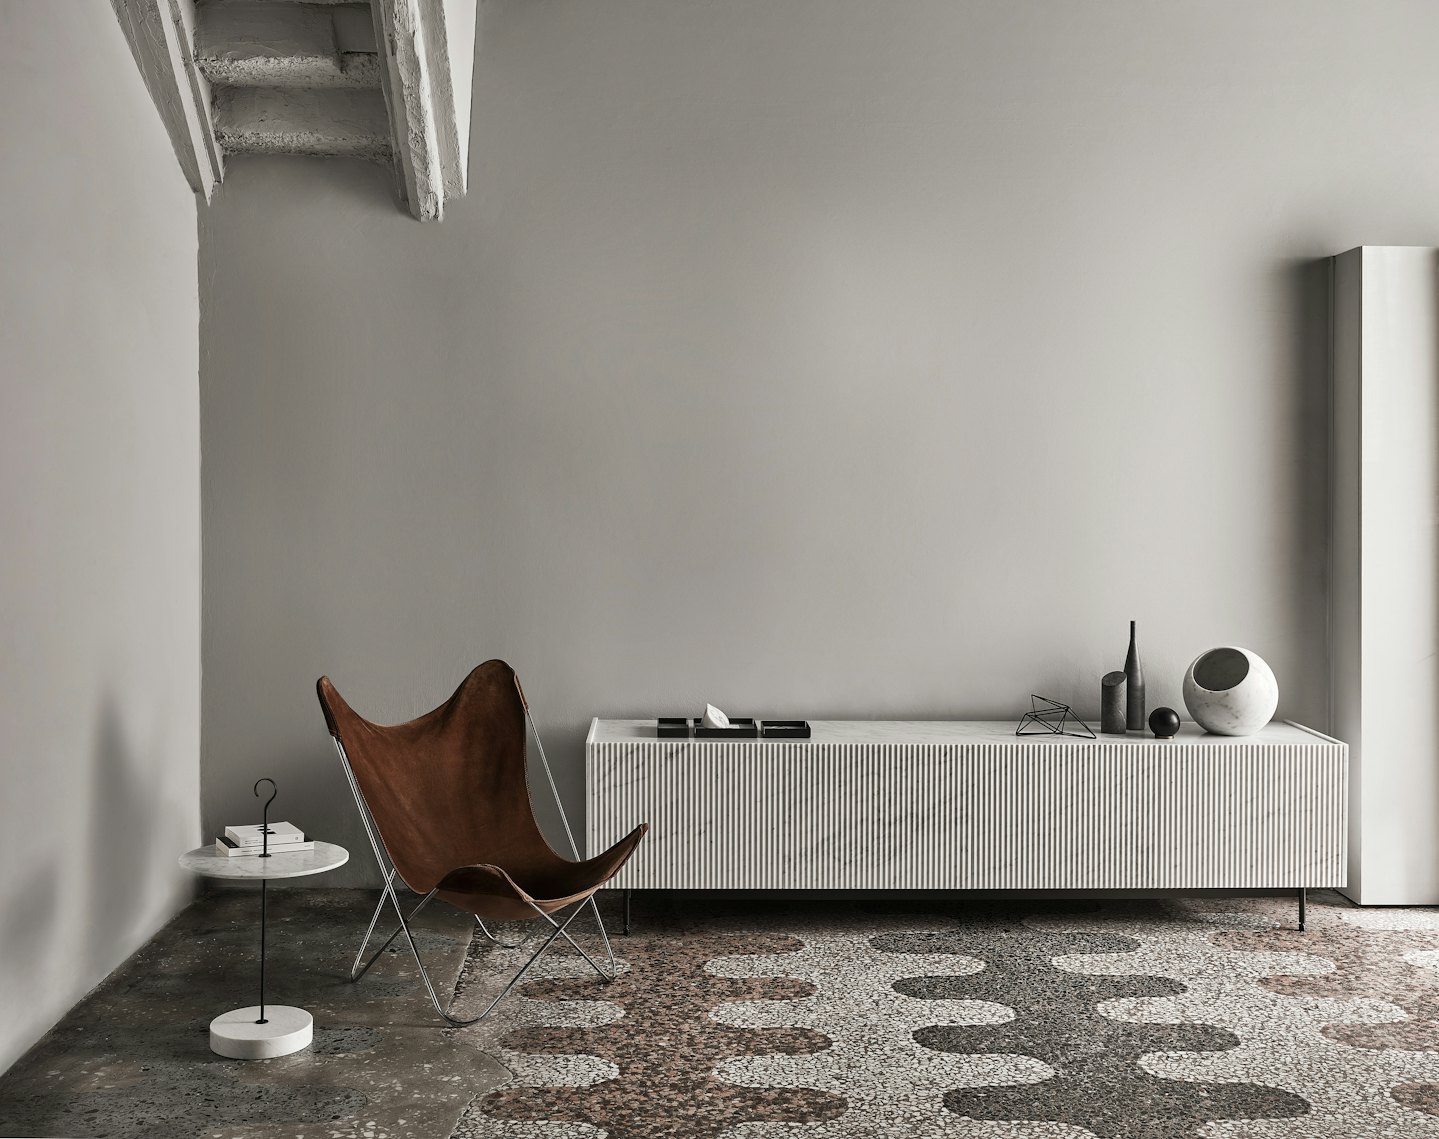 Full Image A milanese apartment